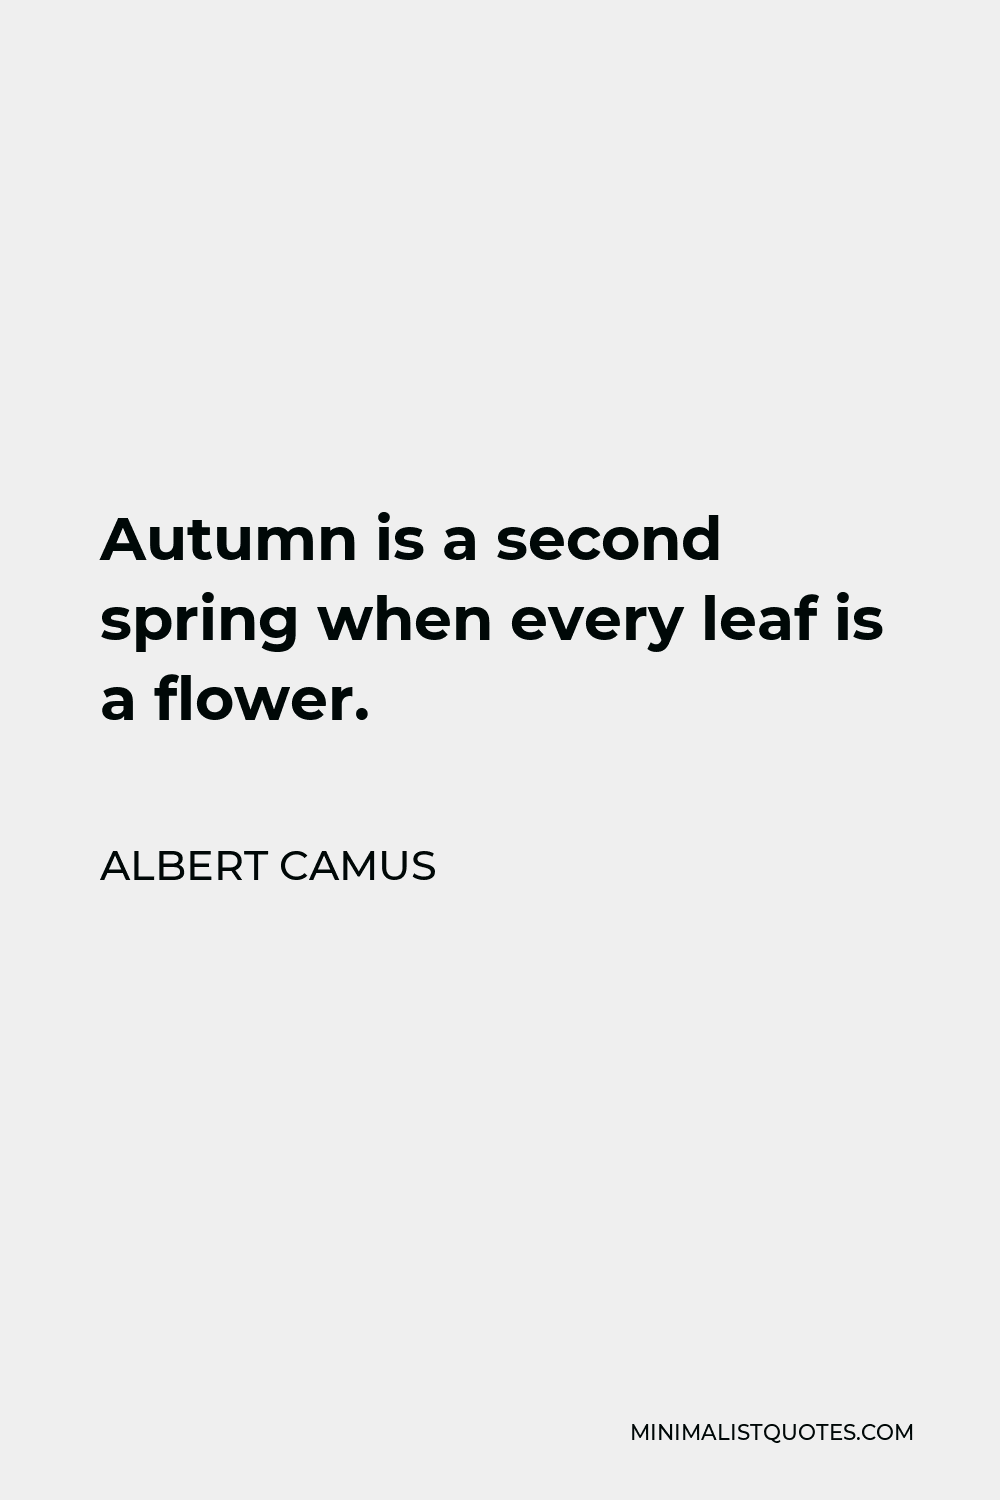 Albert Camus Quote: Autumn is a second spring when every leaf is a flower.